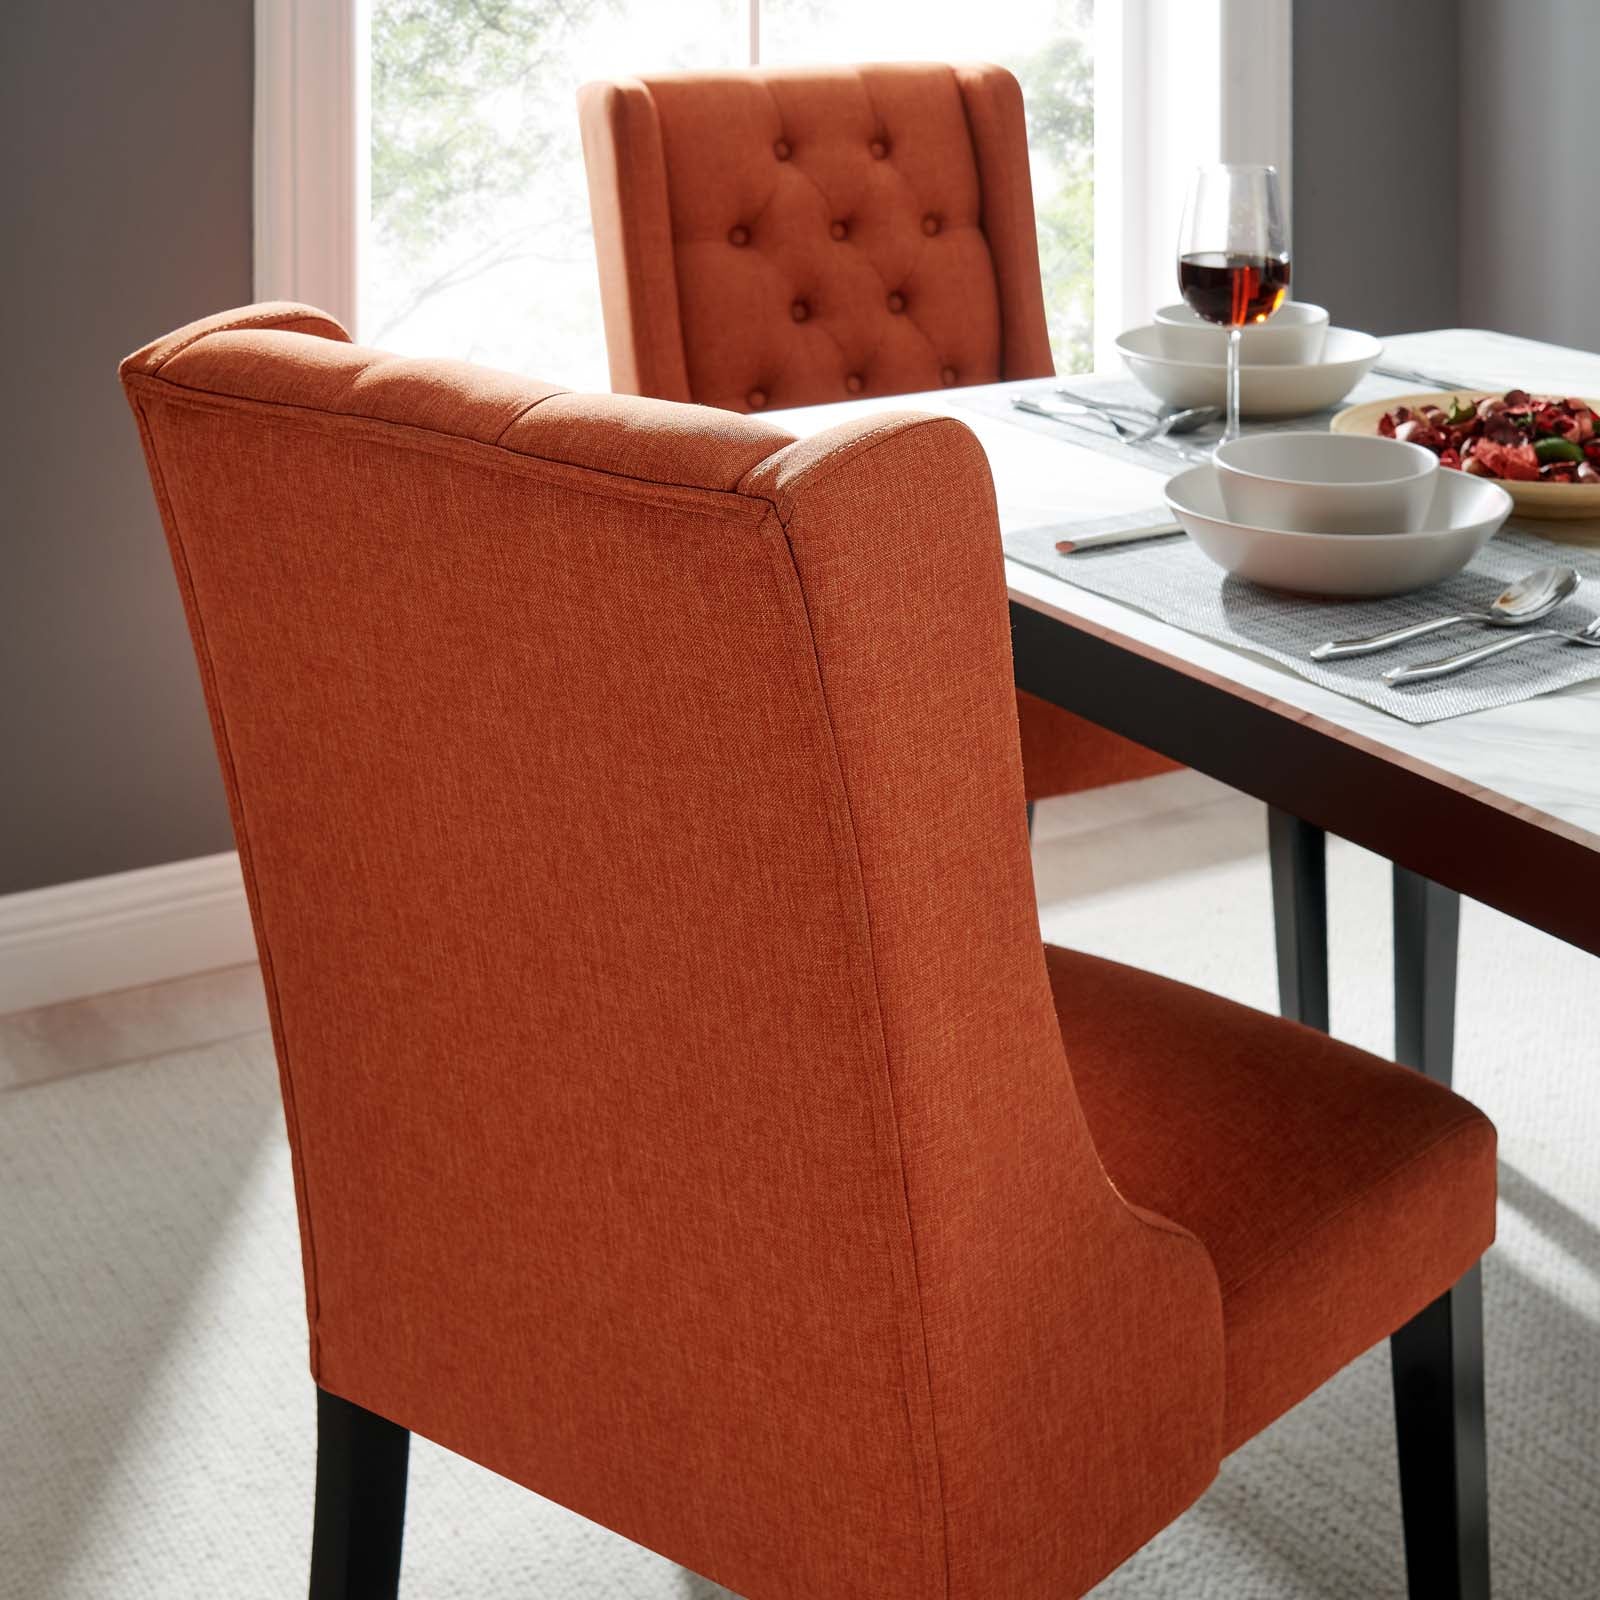 Baronet Button Tufted Fabric Dining Chair - East Shore Modern Home Furnishings